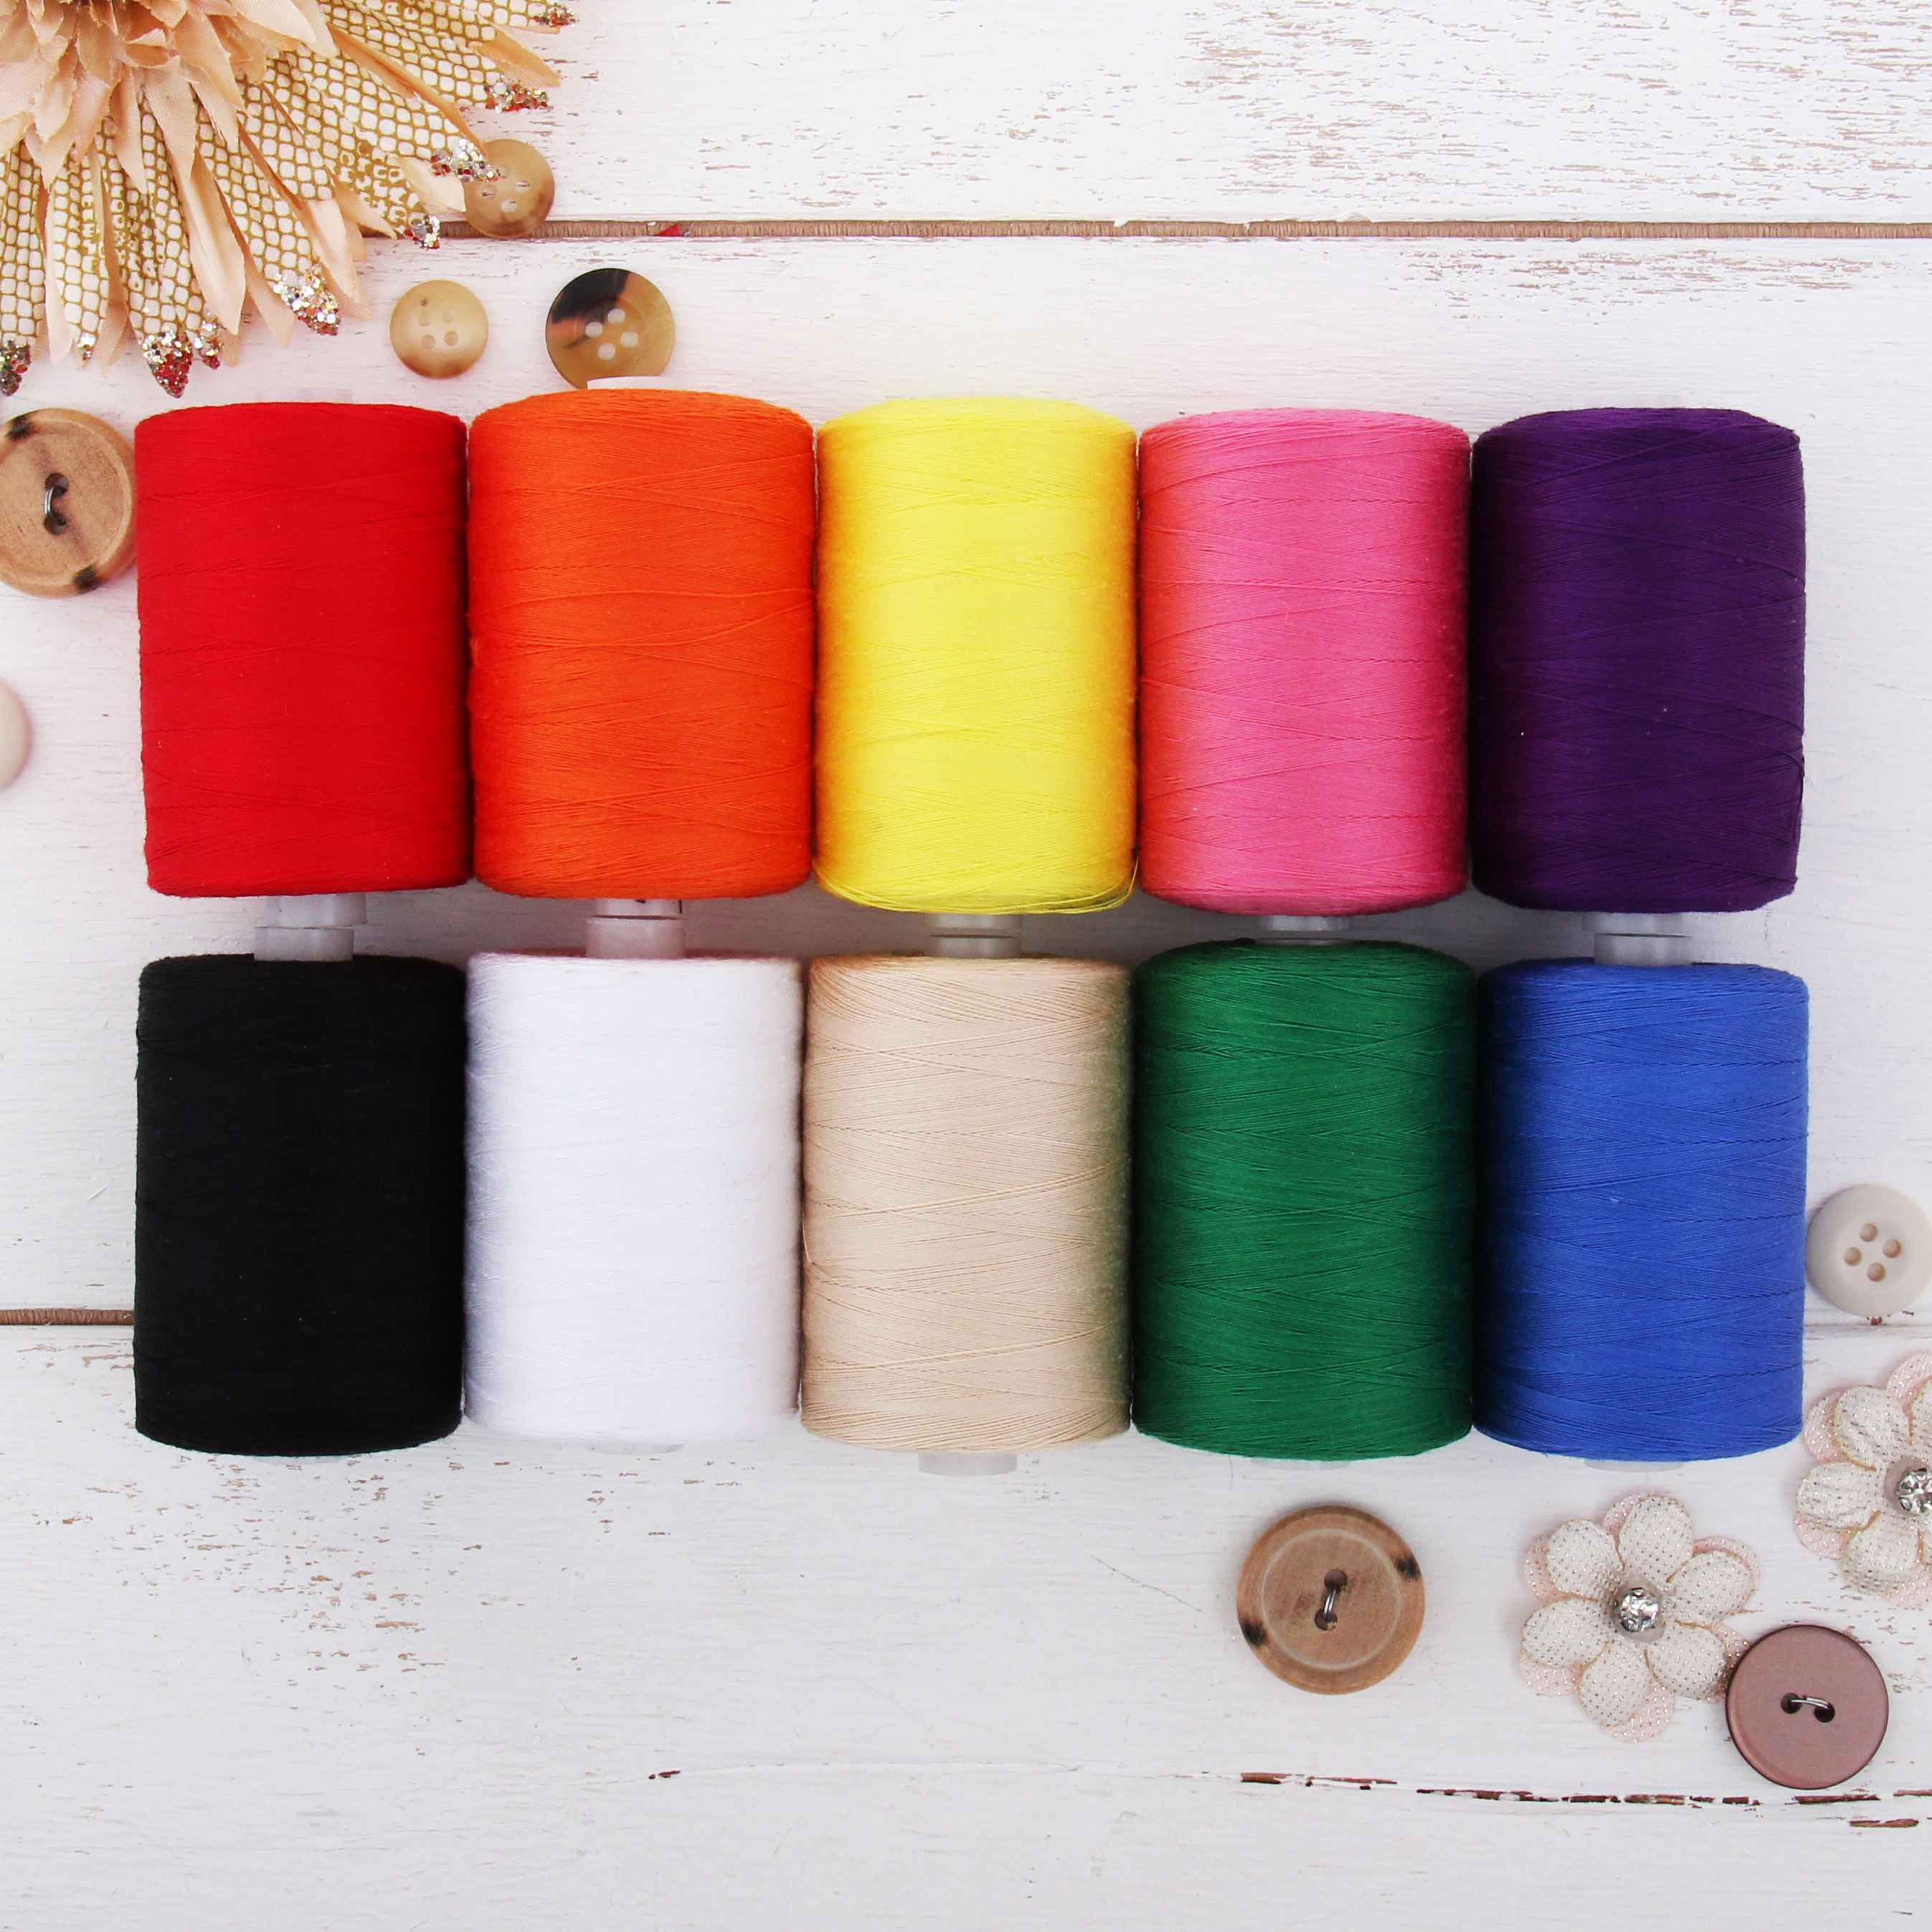 10 Beige Spools For Quilting & Sewing 50/3 Weight Long Staple & Low Lint Over 20 Other Sets Available 1000M Threadart 100% Cotton Thread Set Spools 1100 Yards